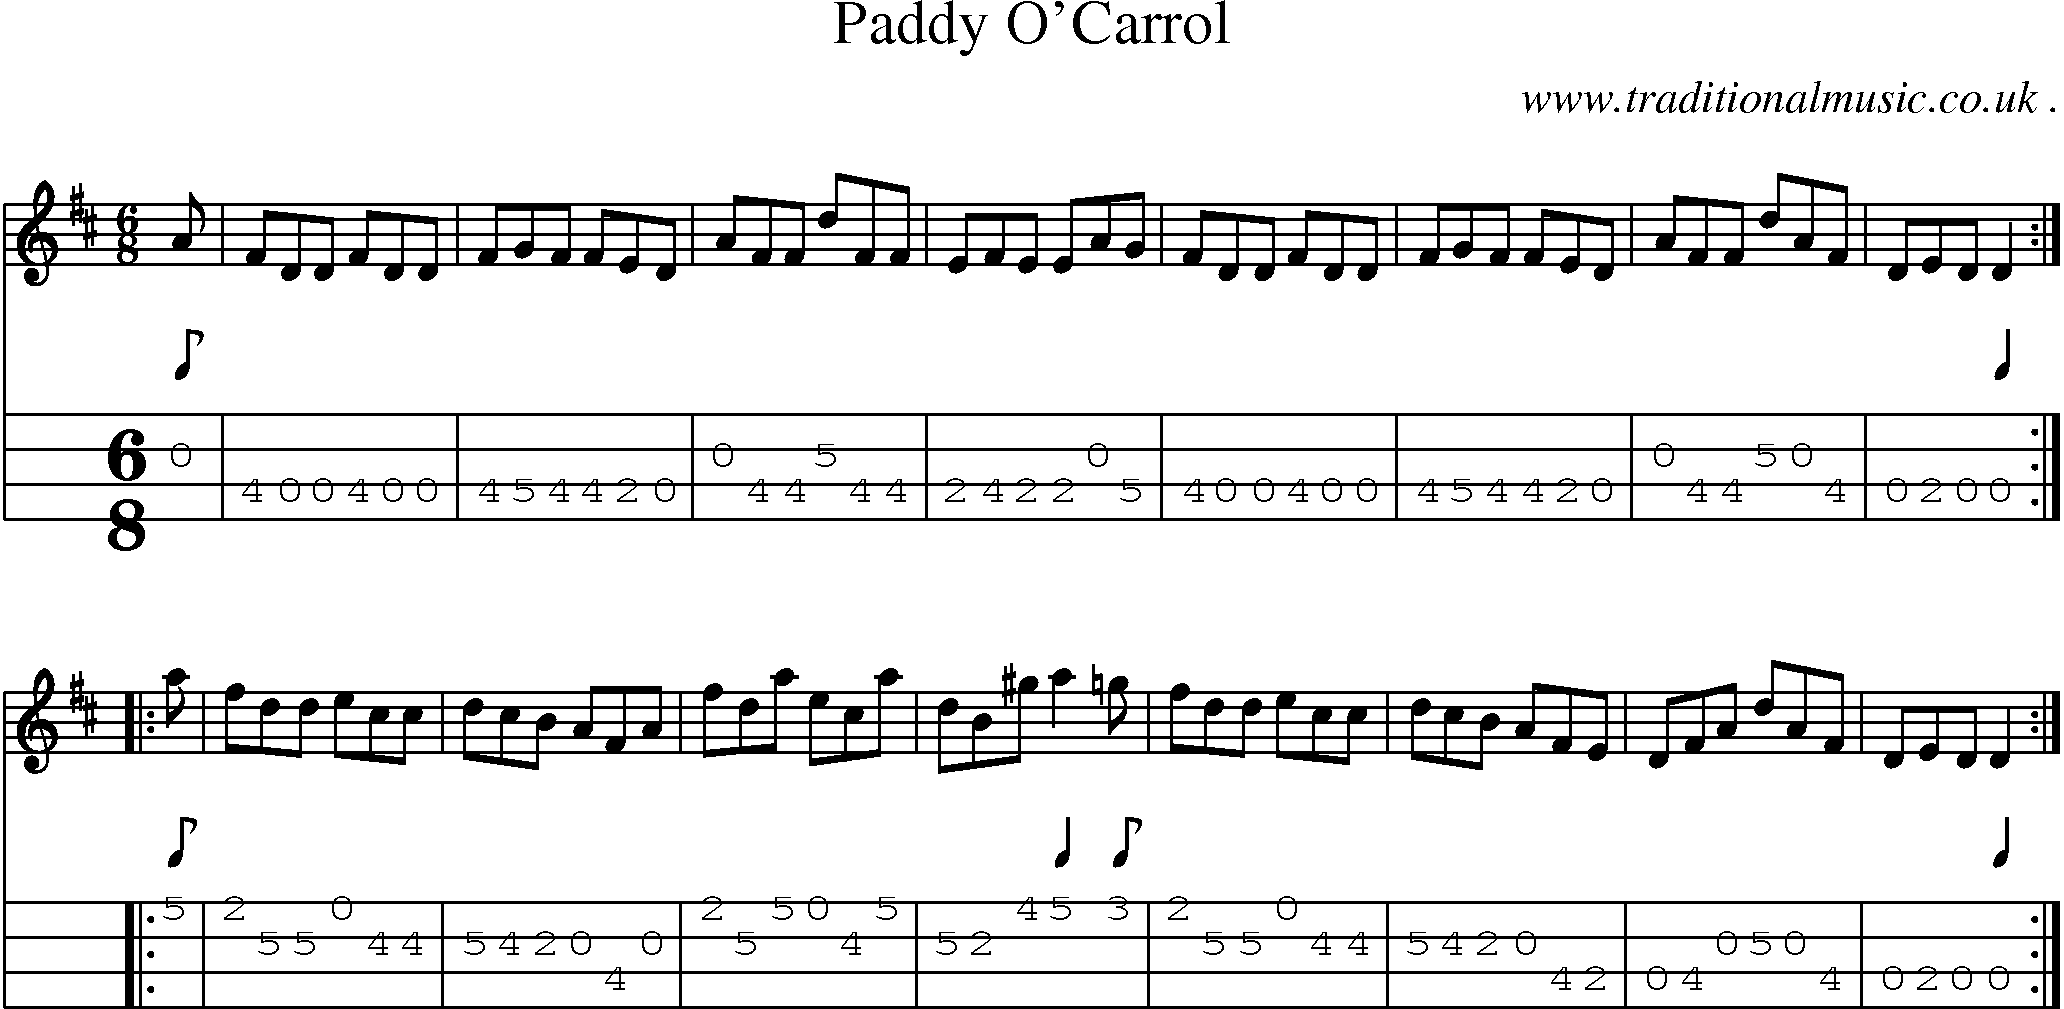 Sheet-music  score, Chords and Mandolin Tabs for Paddy Ocarrol